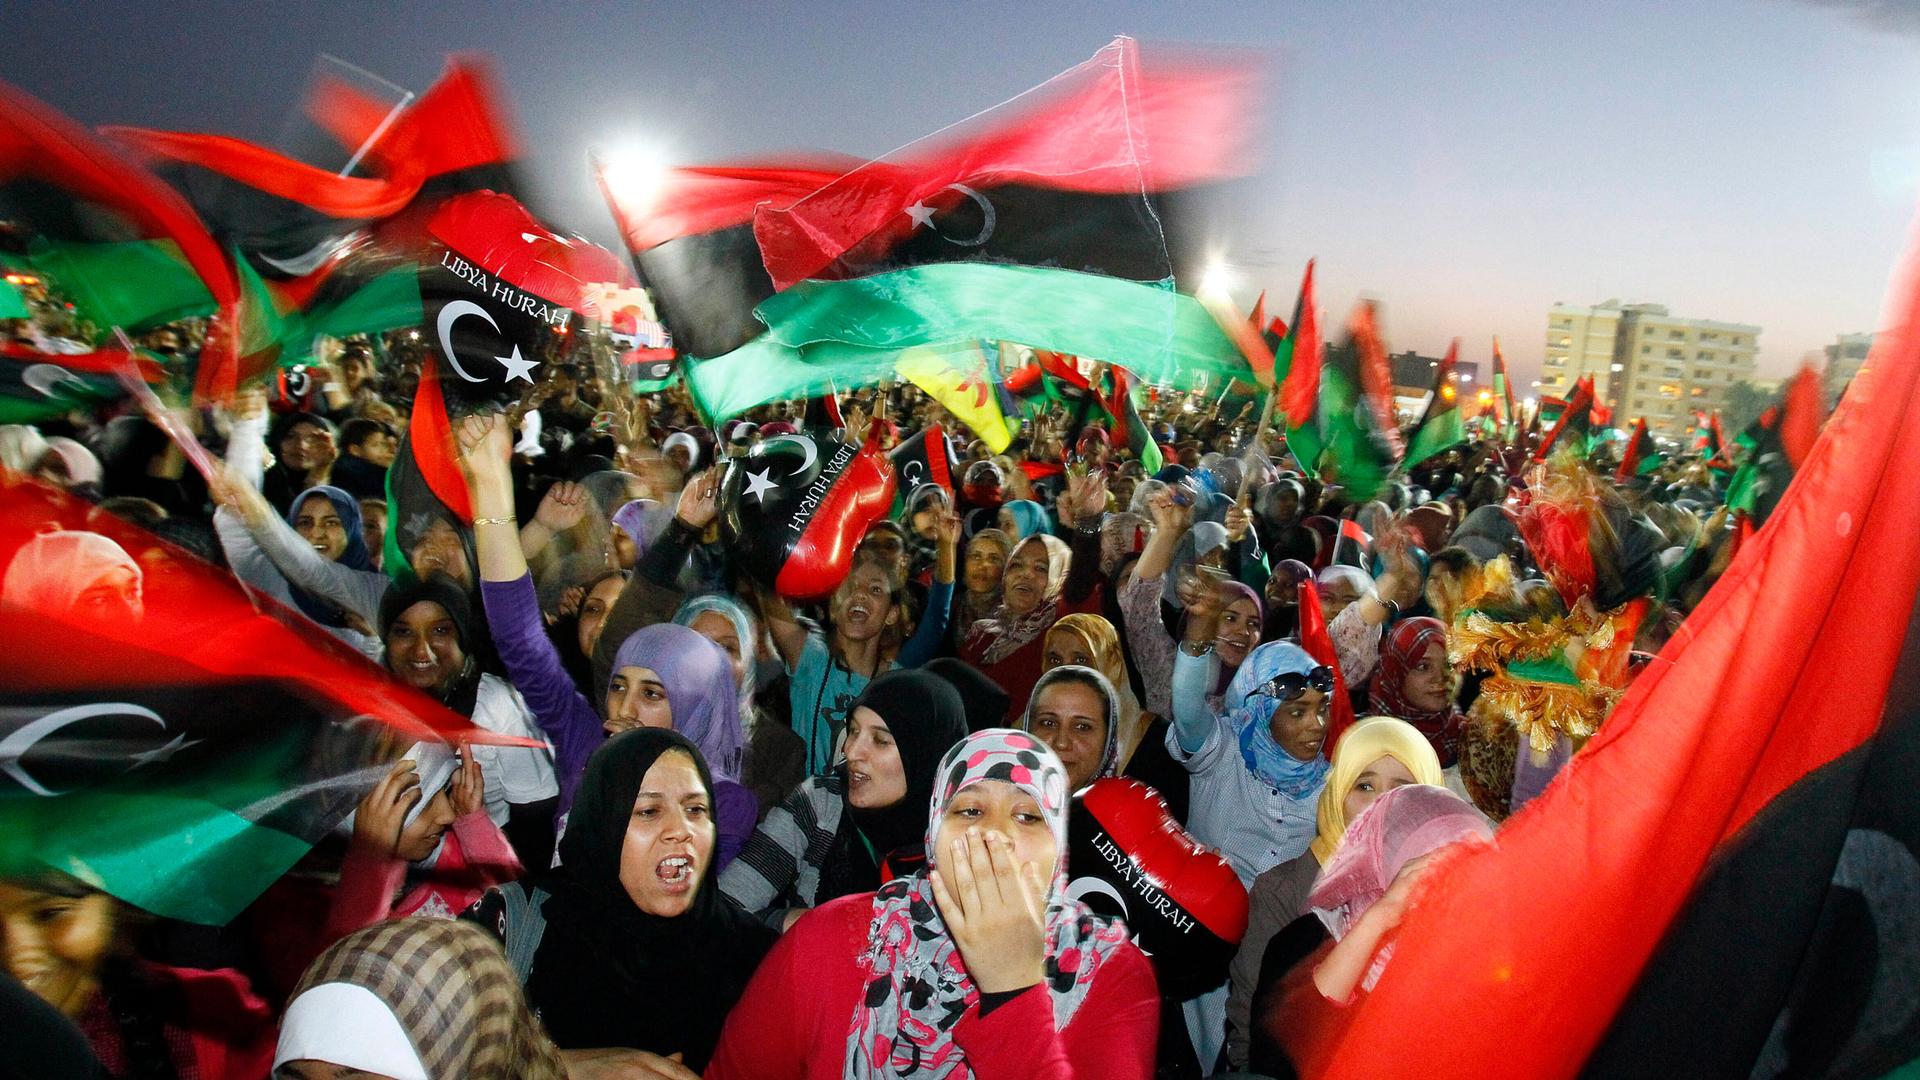 A large crowd of people are shown with many carrying the Libyan flag in a blurred motion photograph.